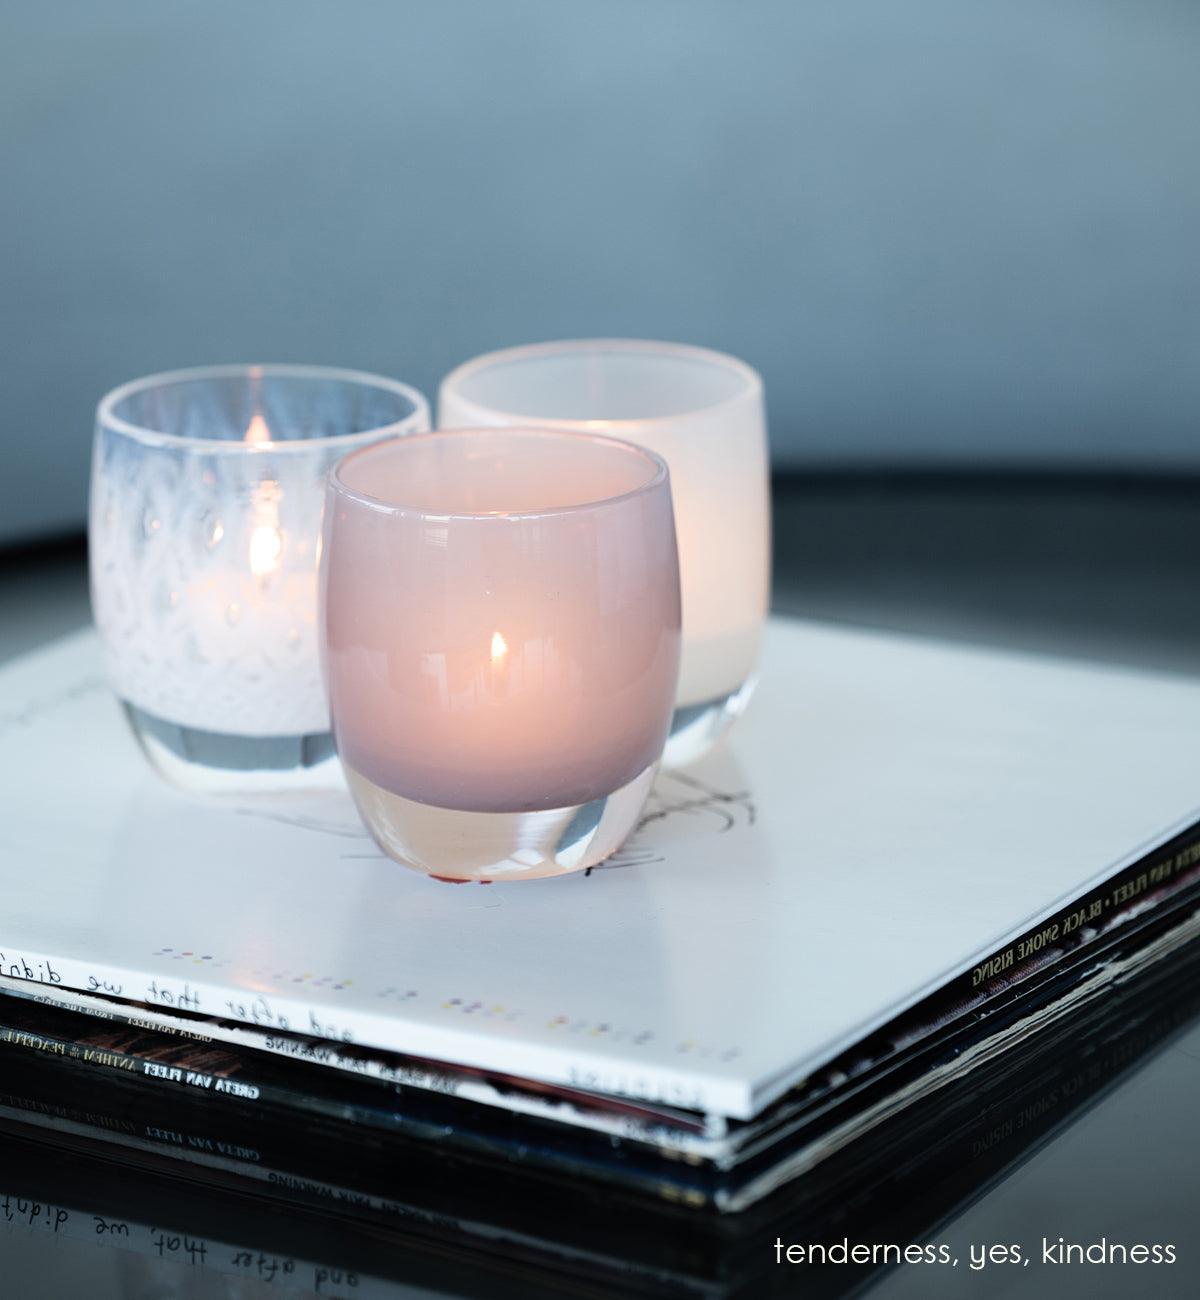 tenderness, a soft-purple hand-blown glass candle holder is paired with yes and kindness in this photo.